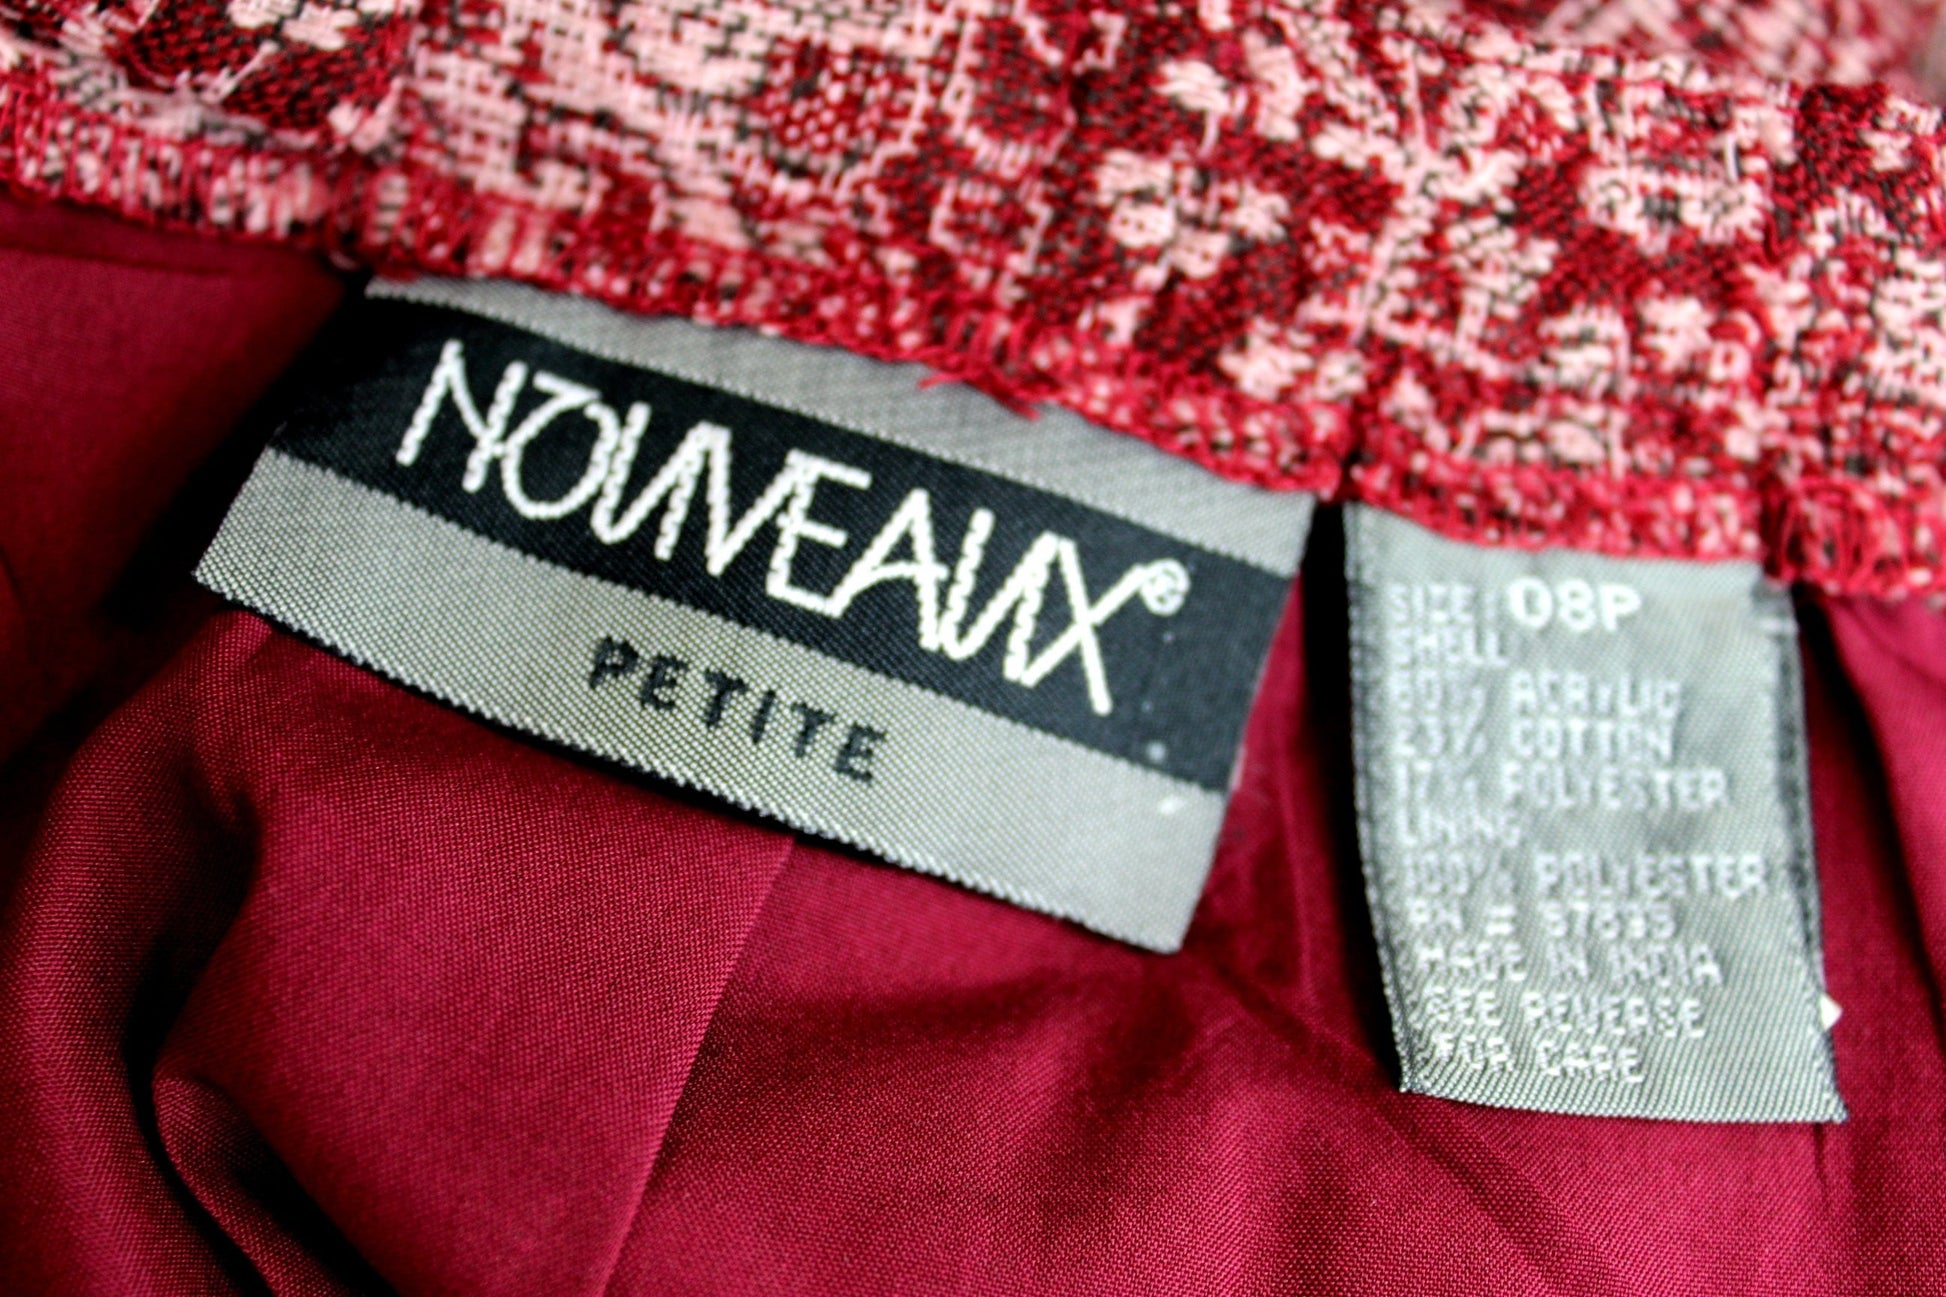 Nouveaux Petite Skirt Paisley Shades of Wine With Tiny Sparkles Fringe blend acrylic cotton poly